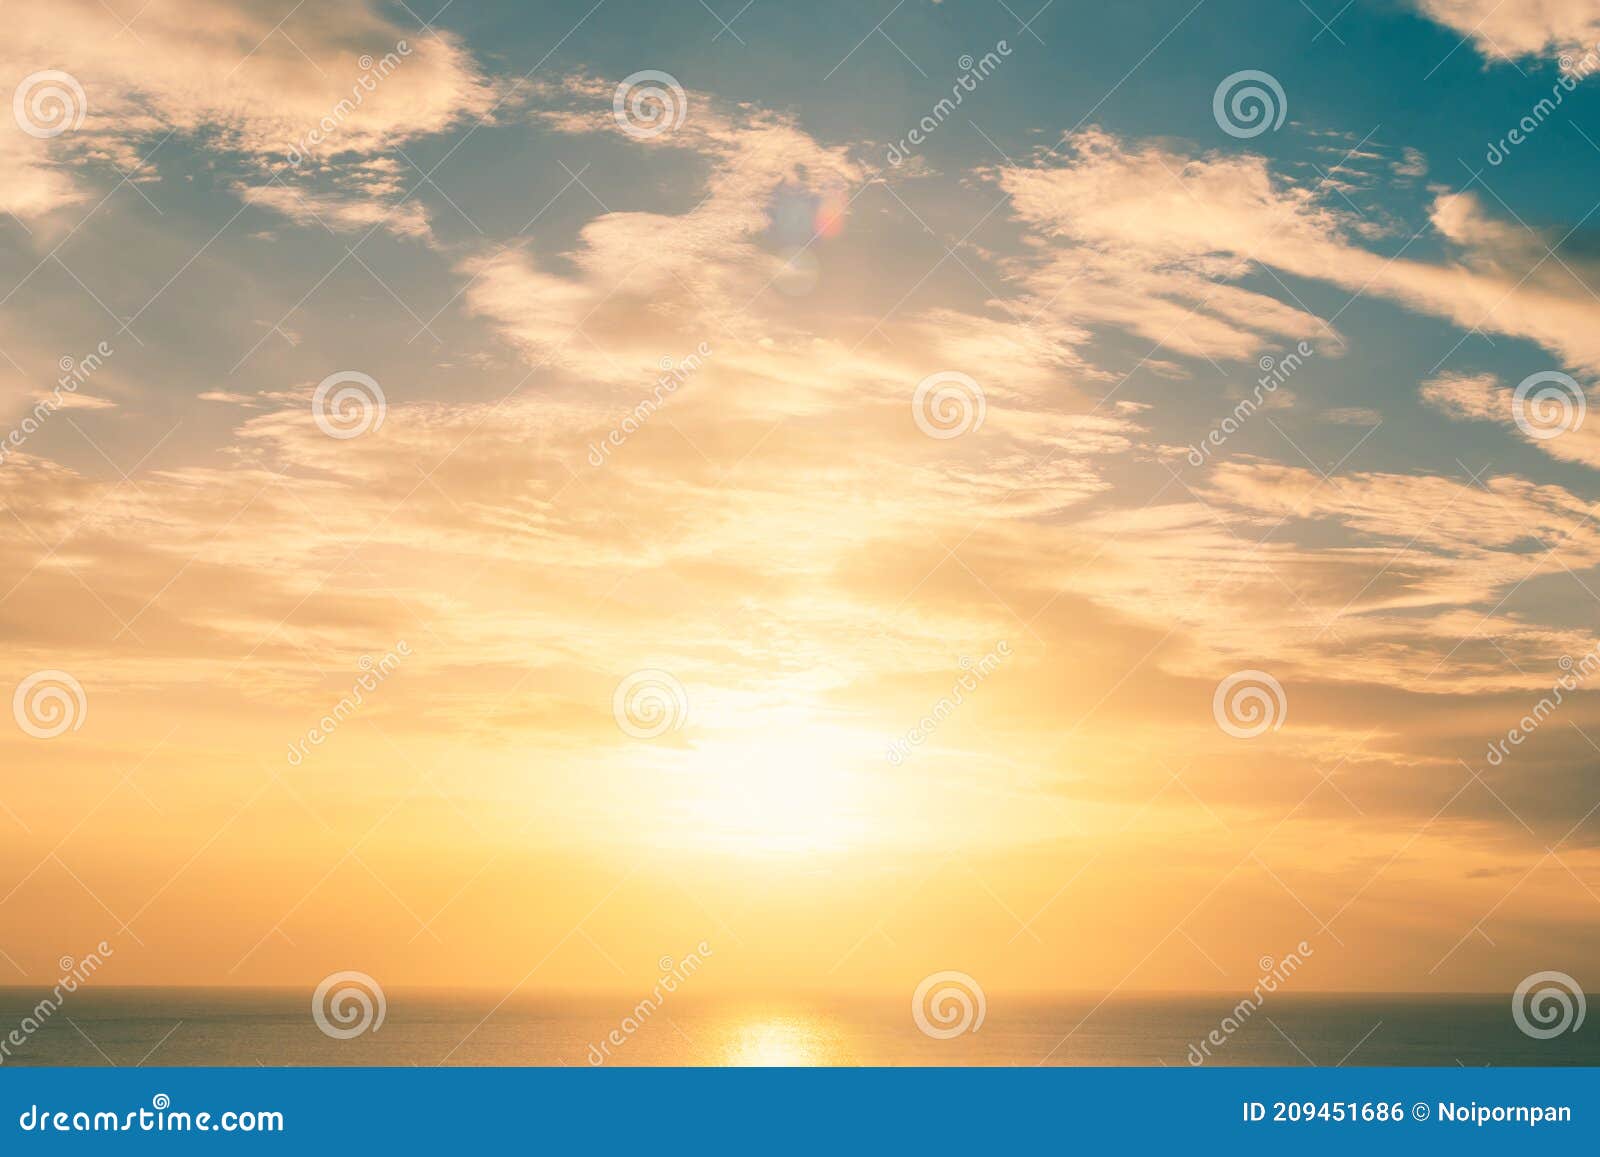 Good Morning Sunrise or Sunset Evening Sky Background with Cloud ...